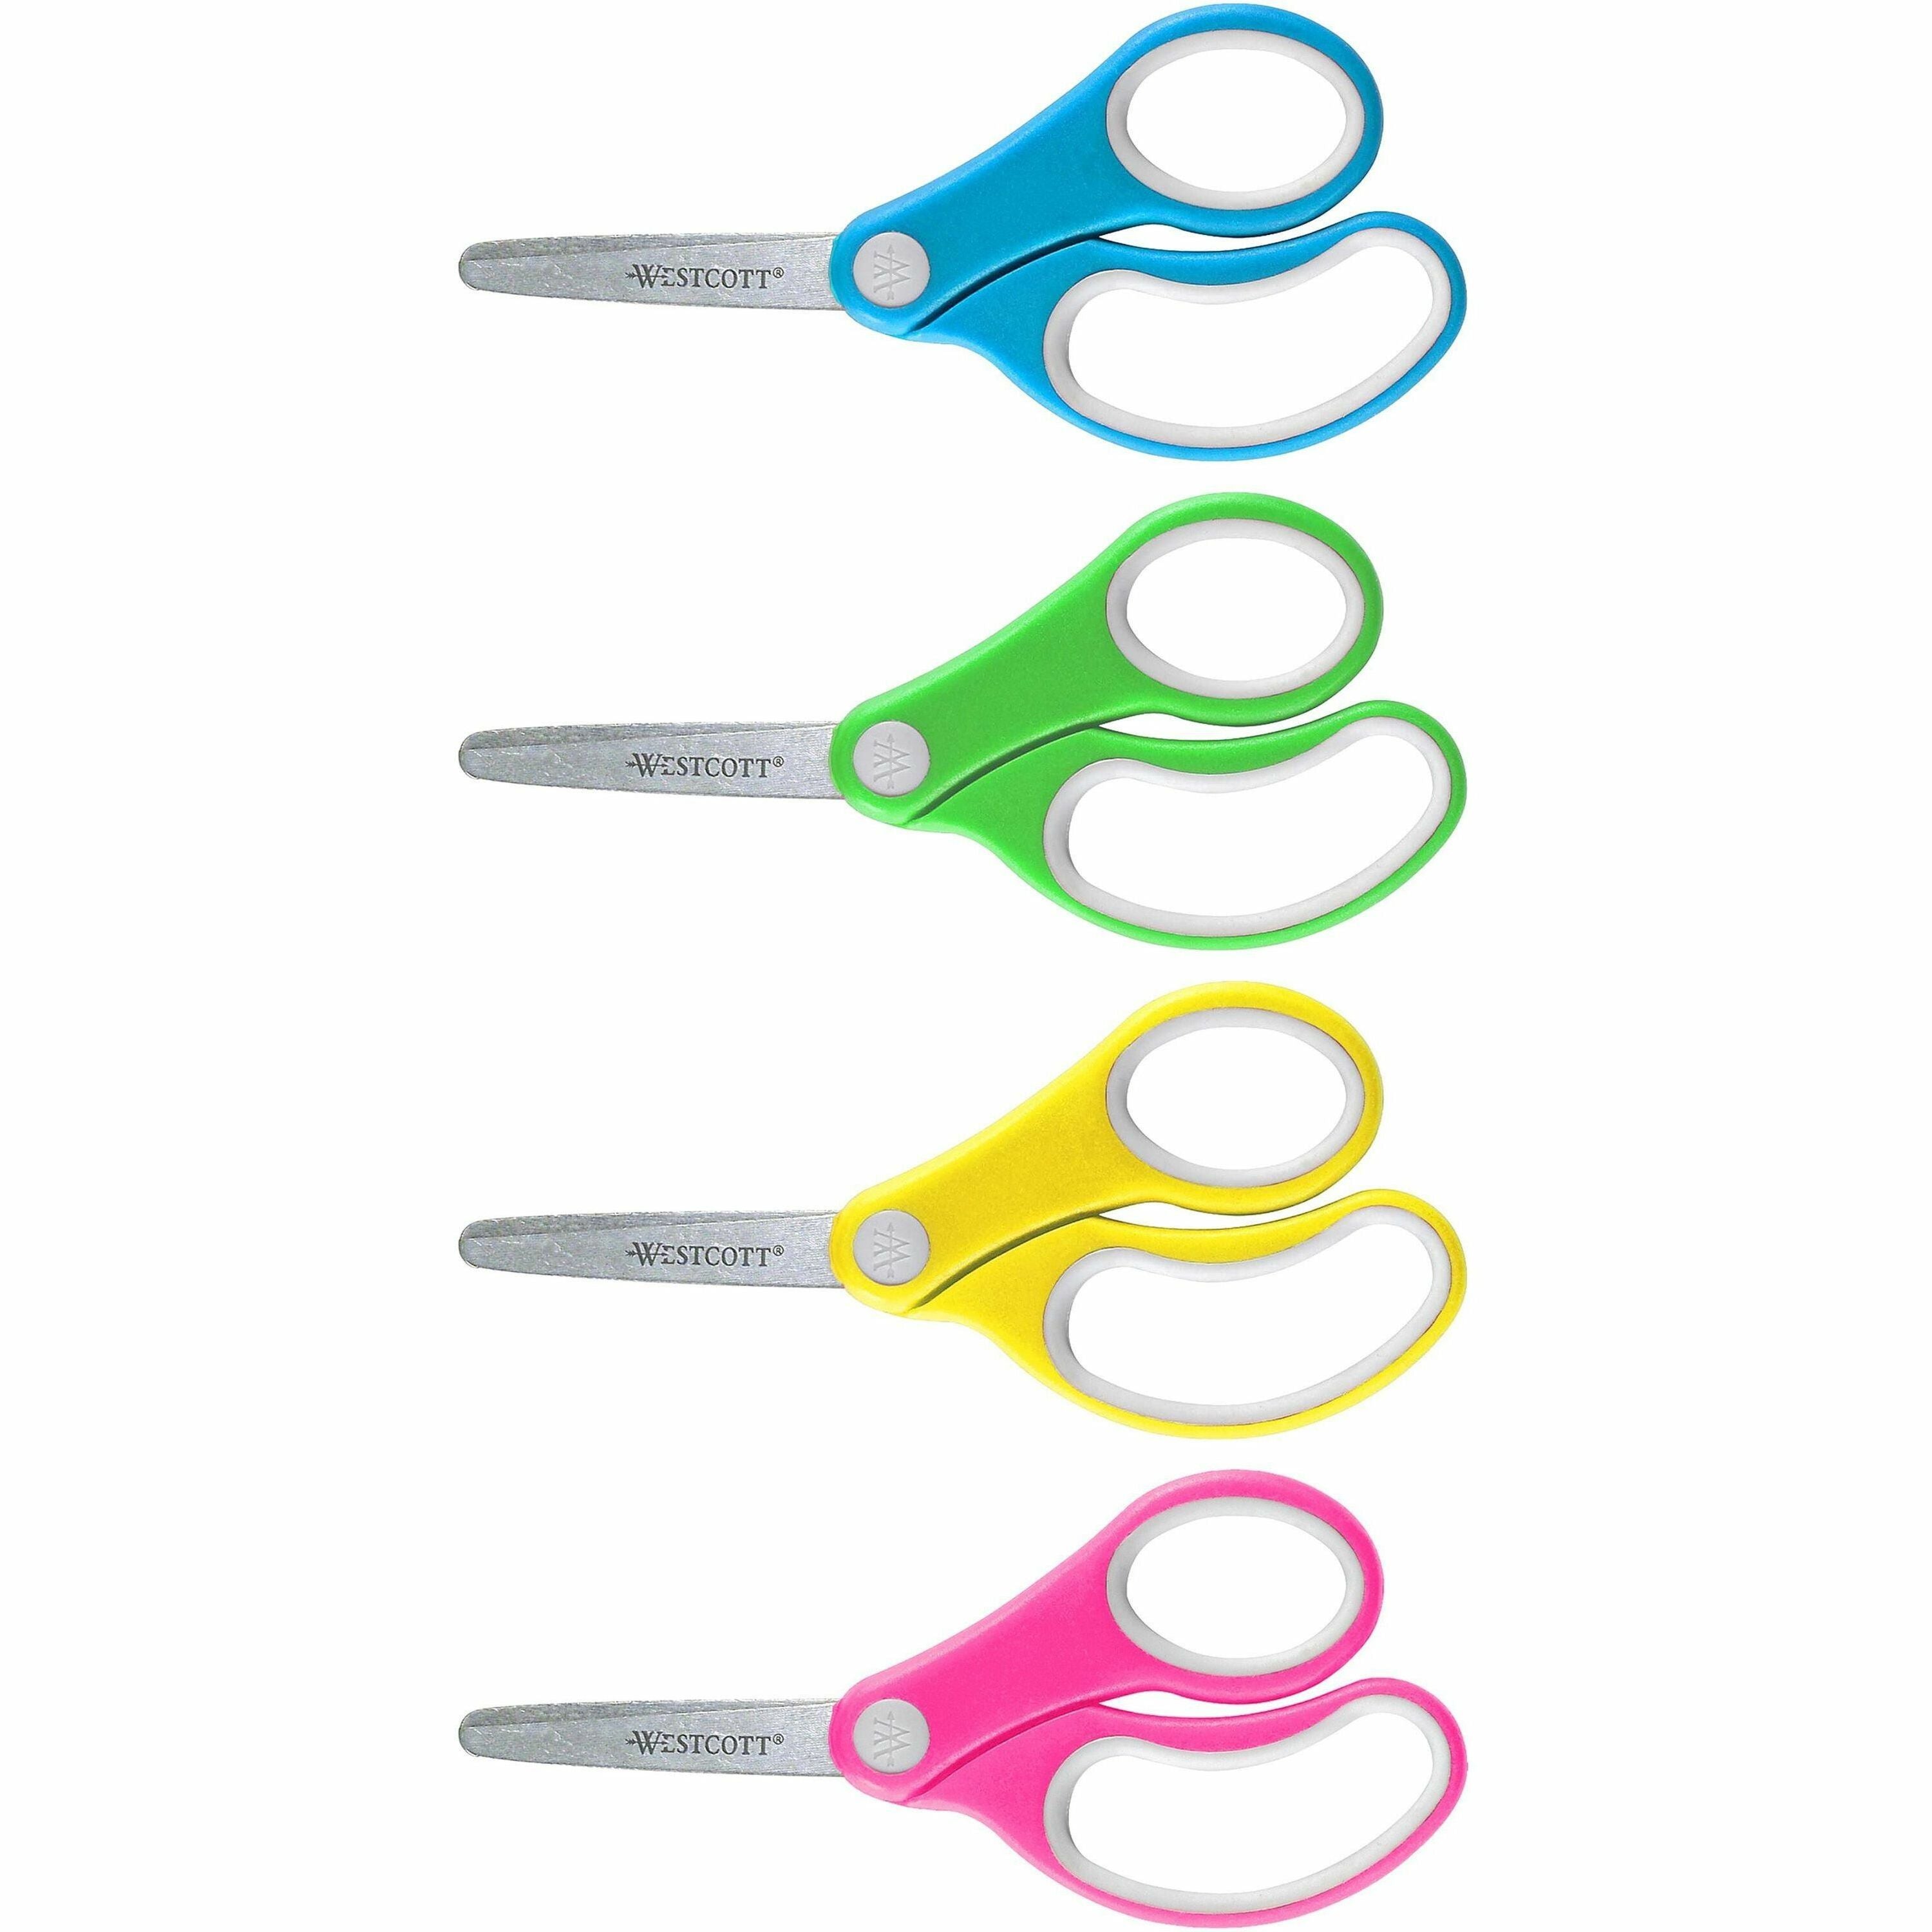 Westcott Soft Handle 5" Blunt Kids Value Scissors - 5" Overall Length - Left/Right - Stainless Steel - Blunted Tip - Assorted - 1 Each - 